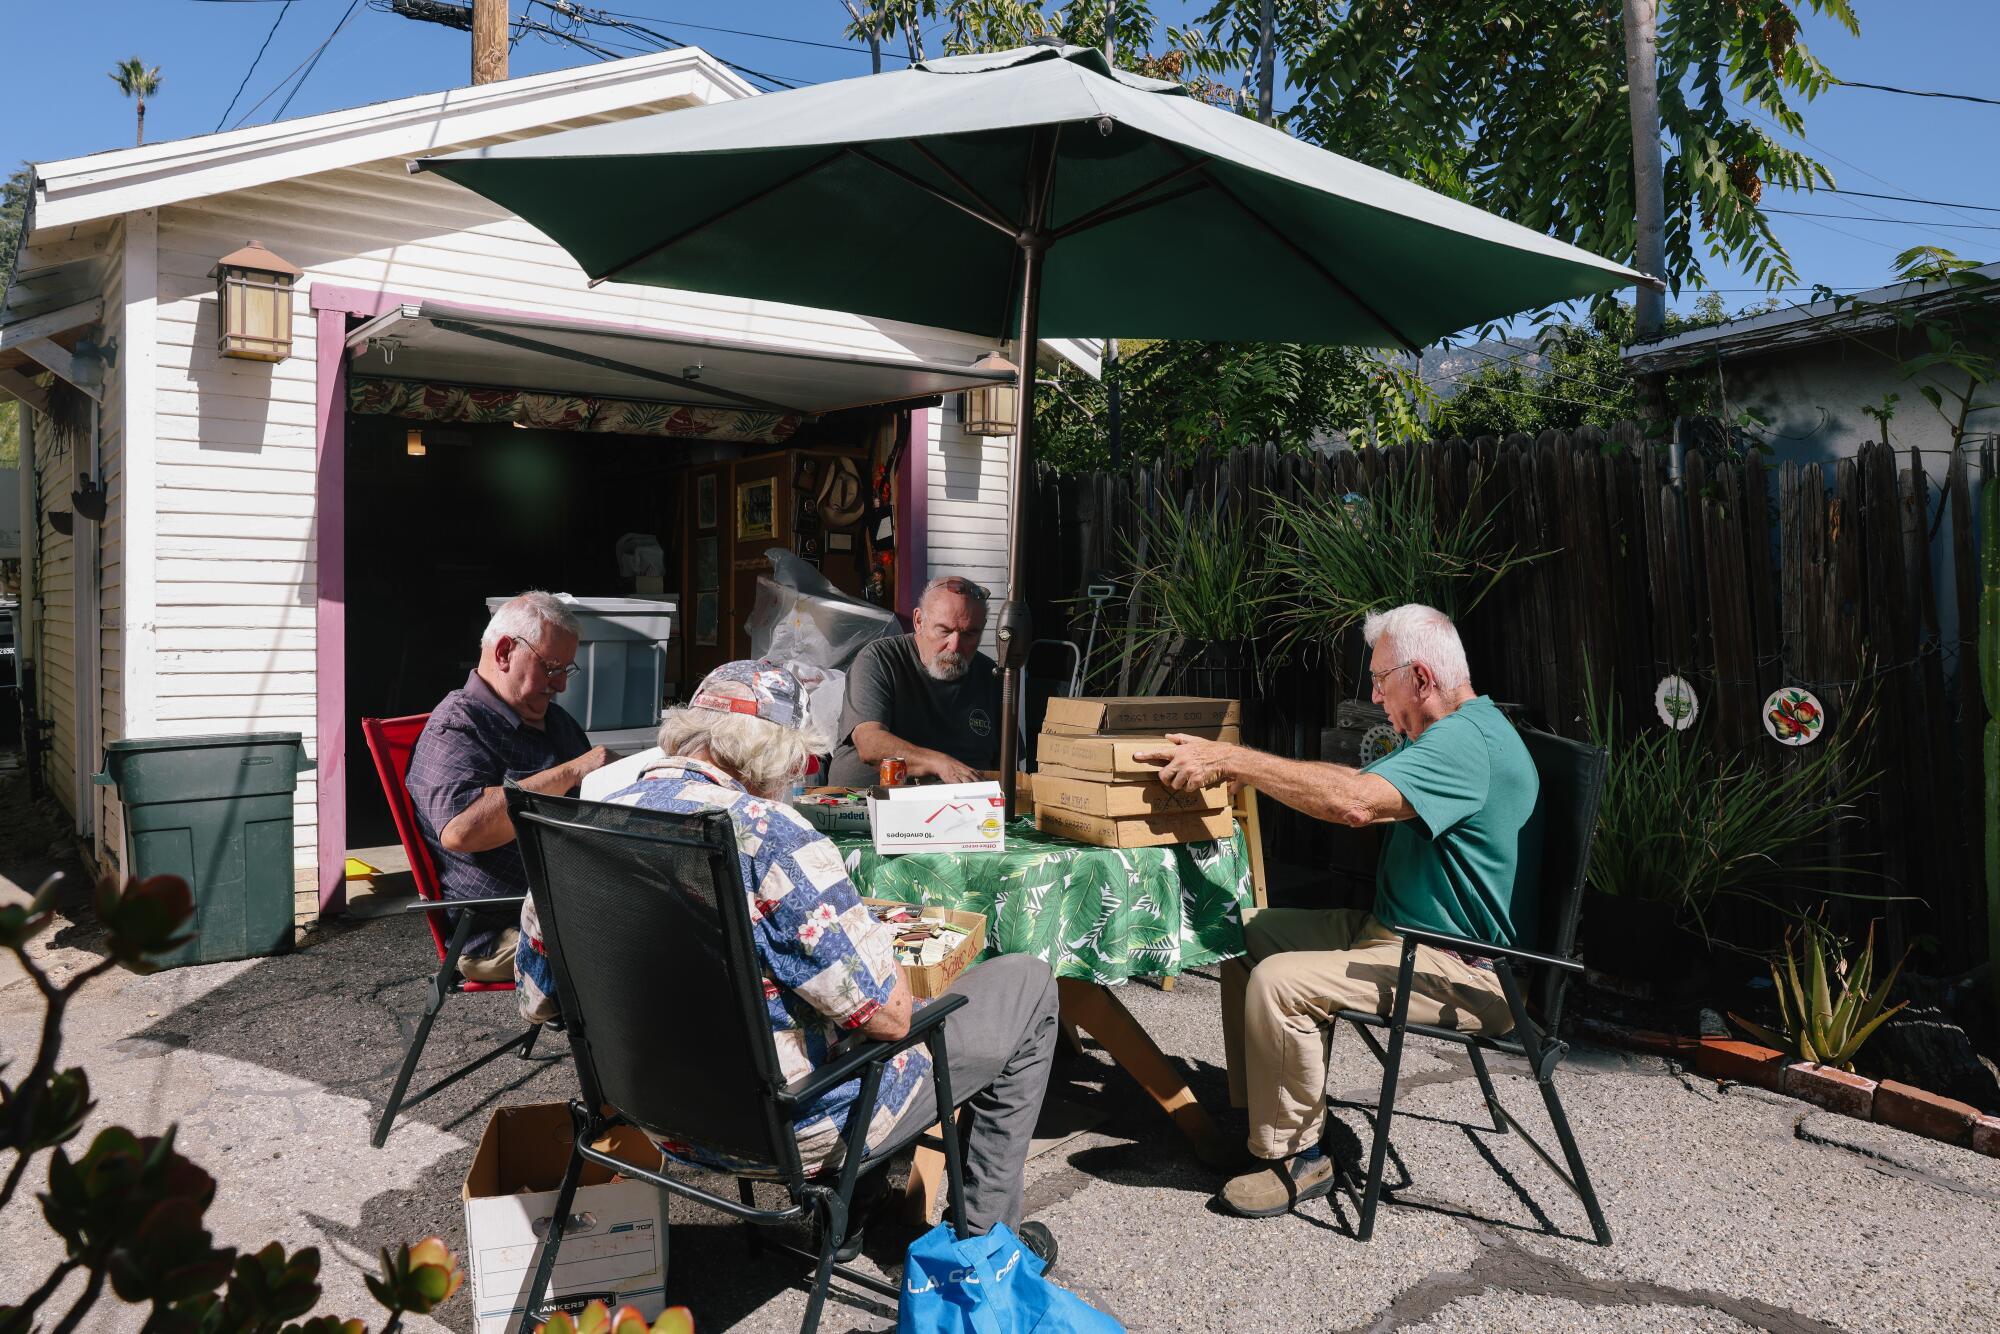 People sit at a table under a big umbrella, outside an open garage, sorting through matchbooks